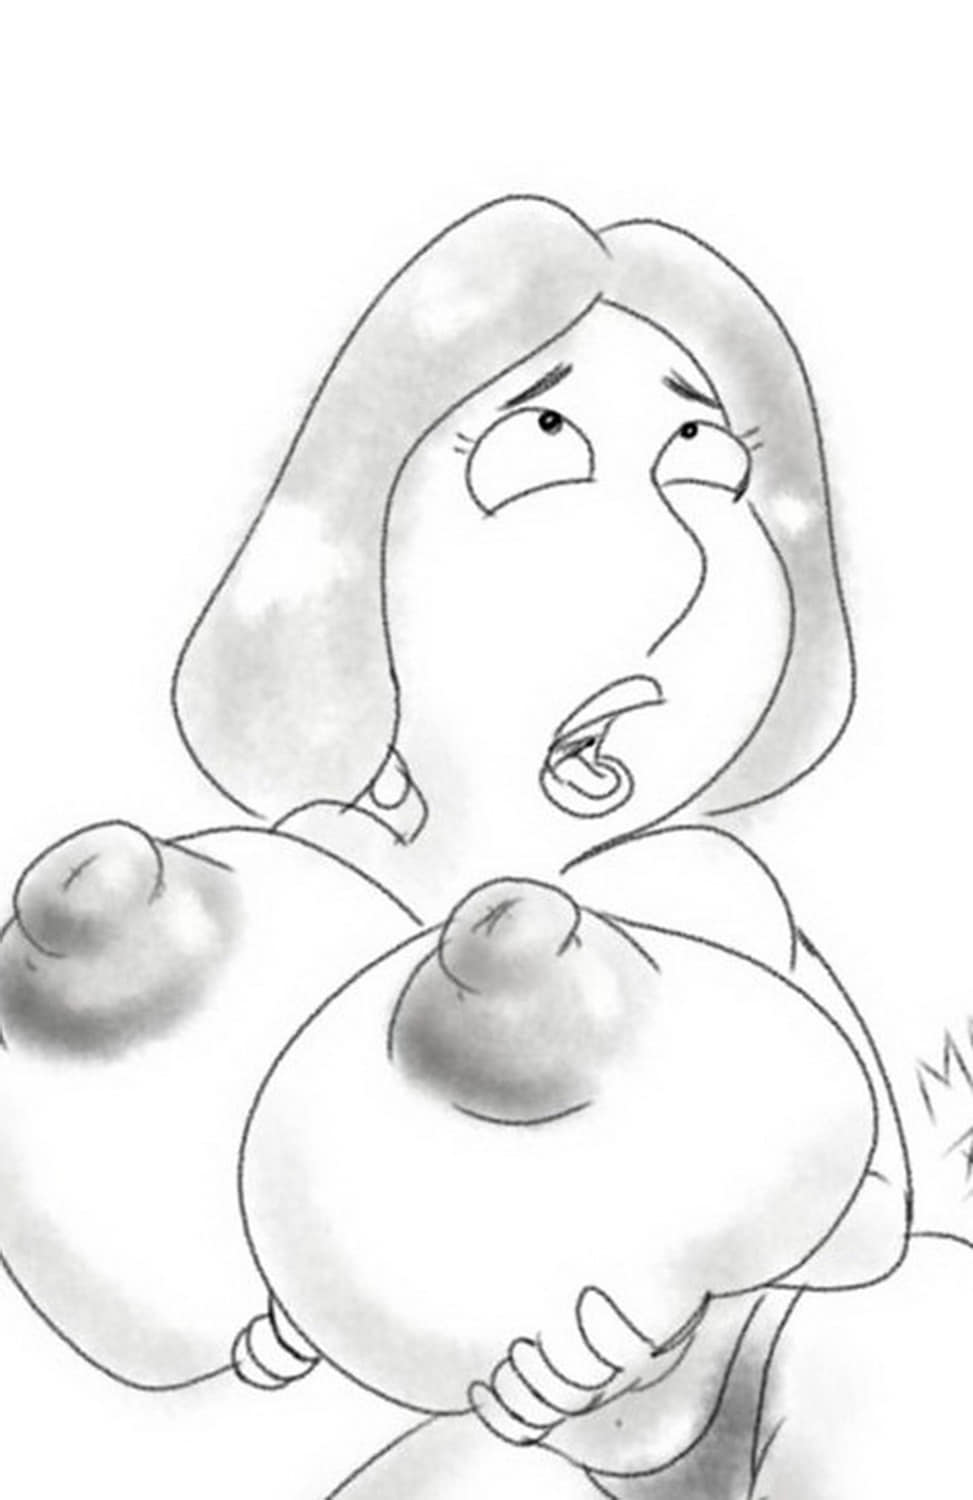 Lois Griffin Big Breast